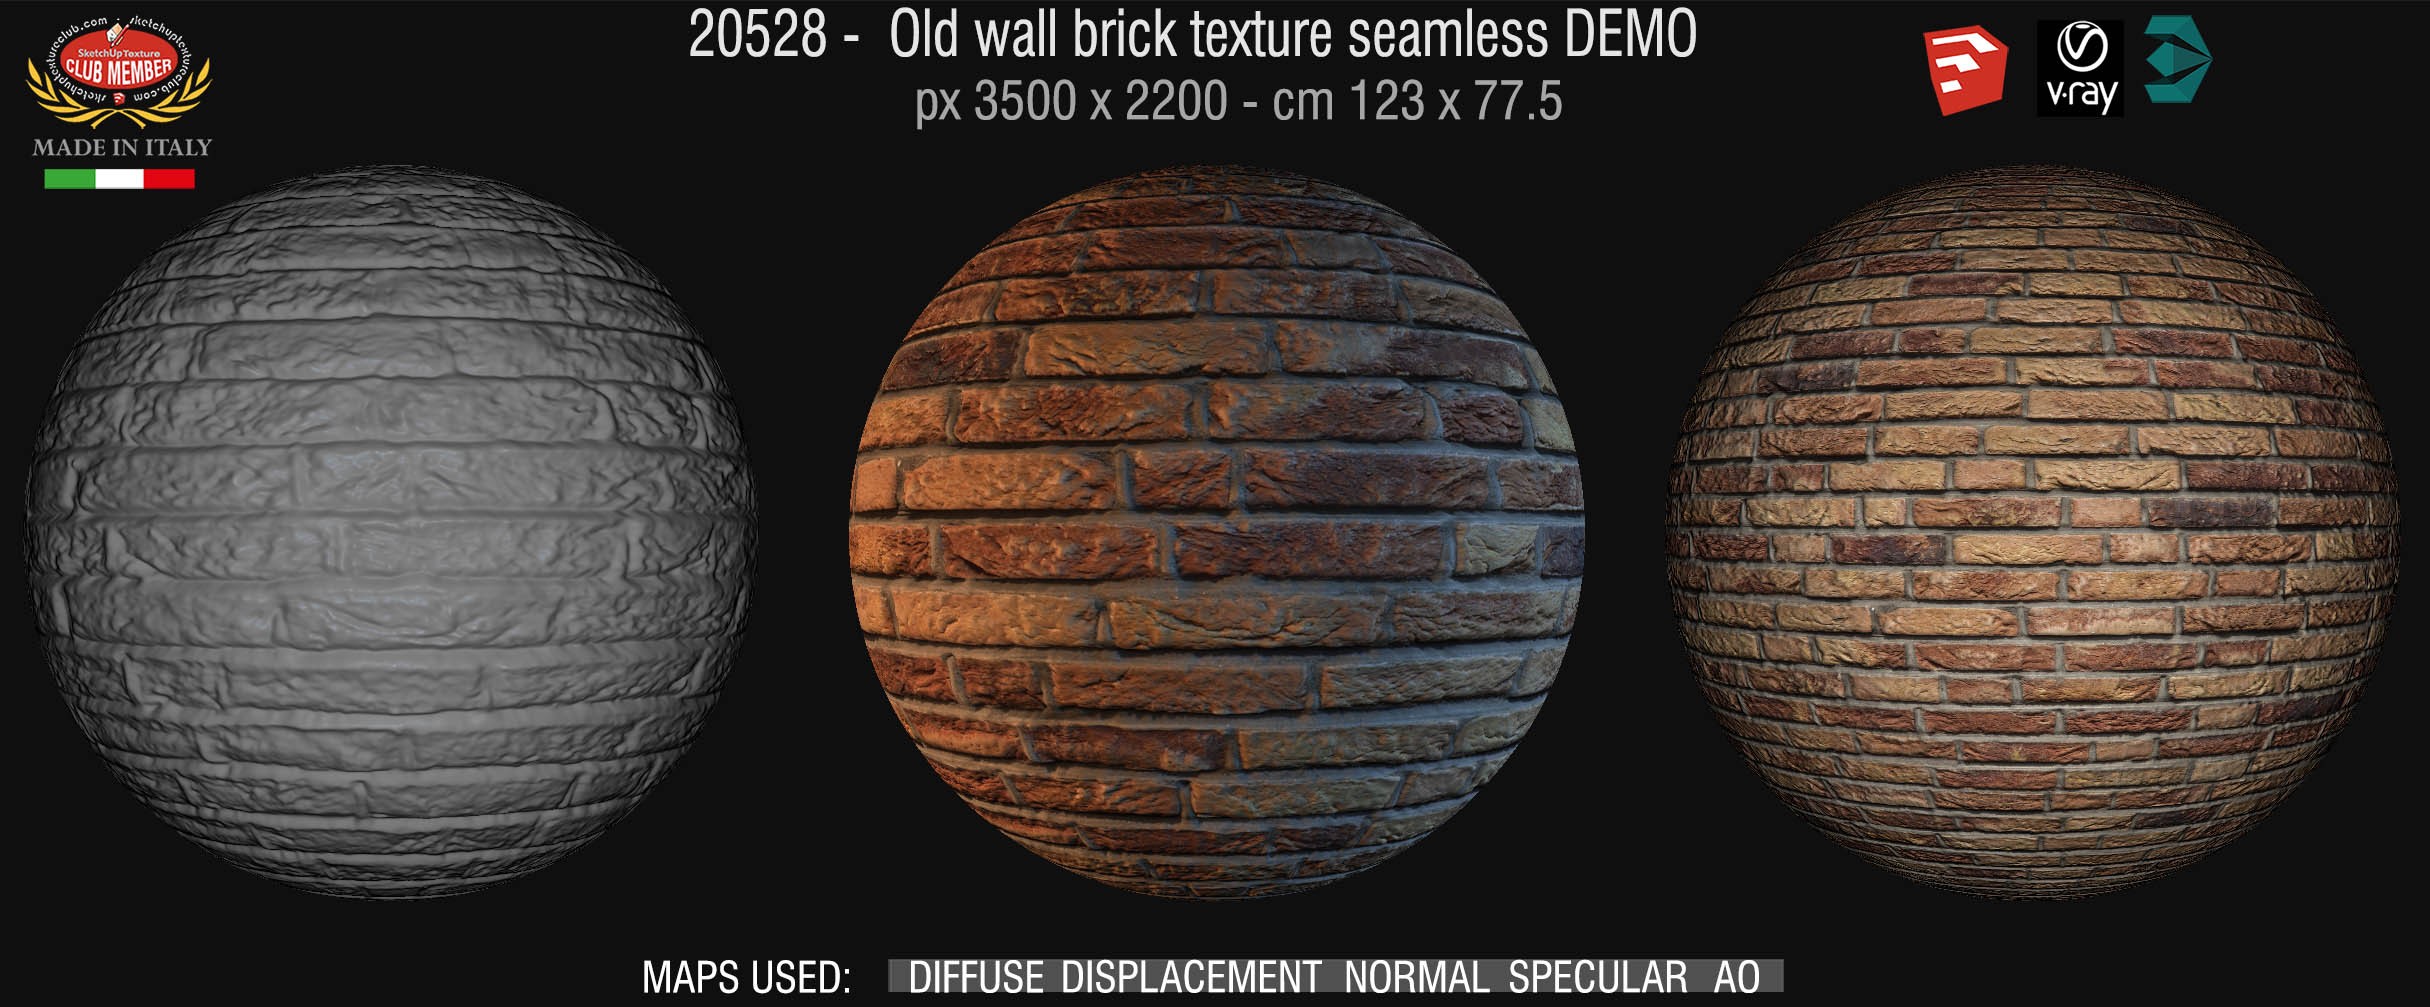 20528 old wall brick texture + maps DEMO